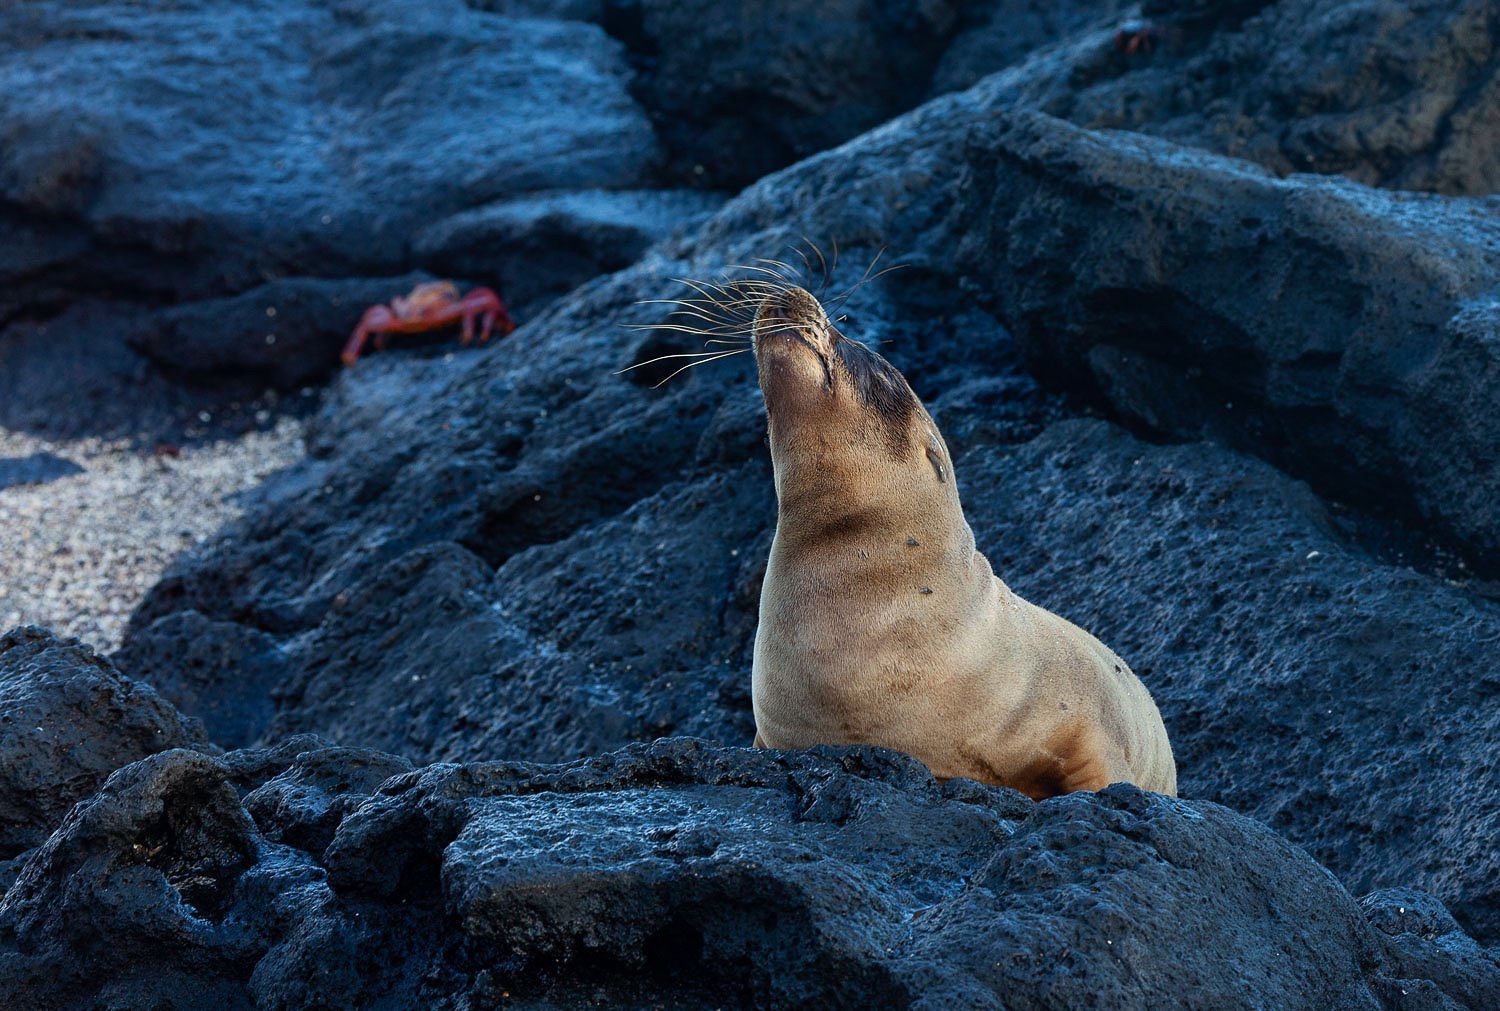 Wiskers in the Wind, Sea Lion